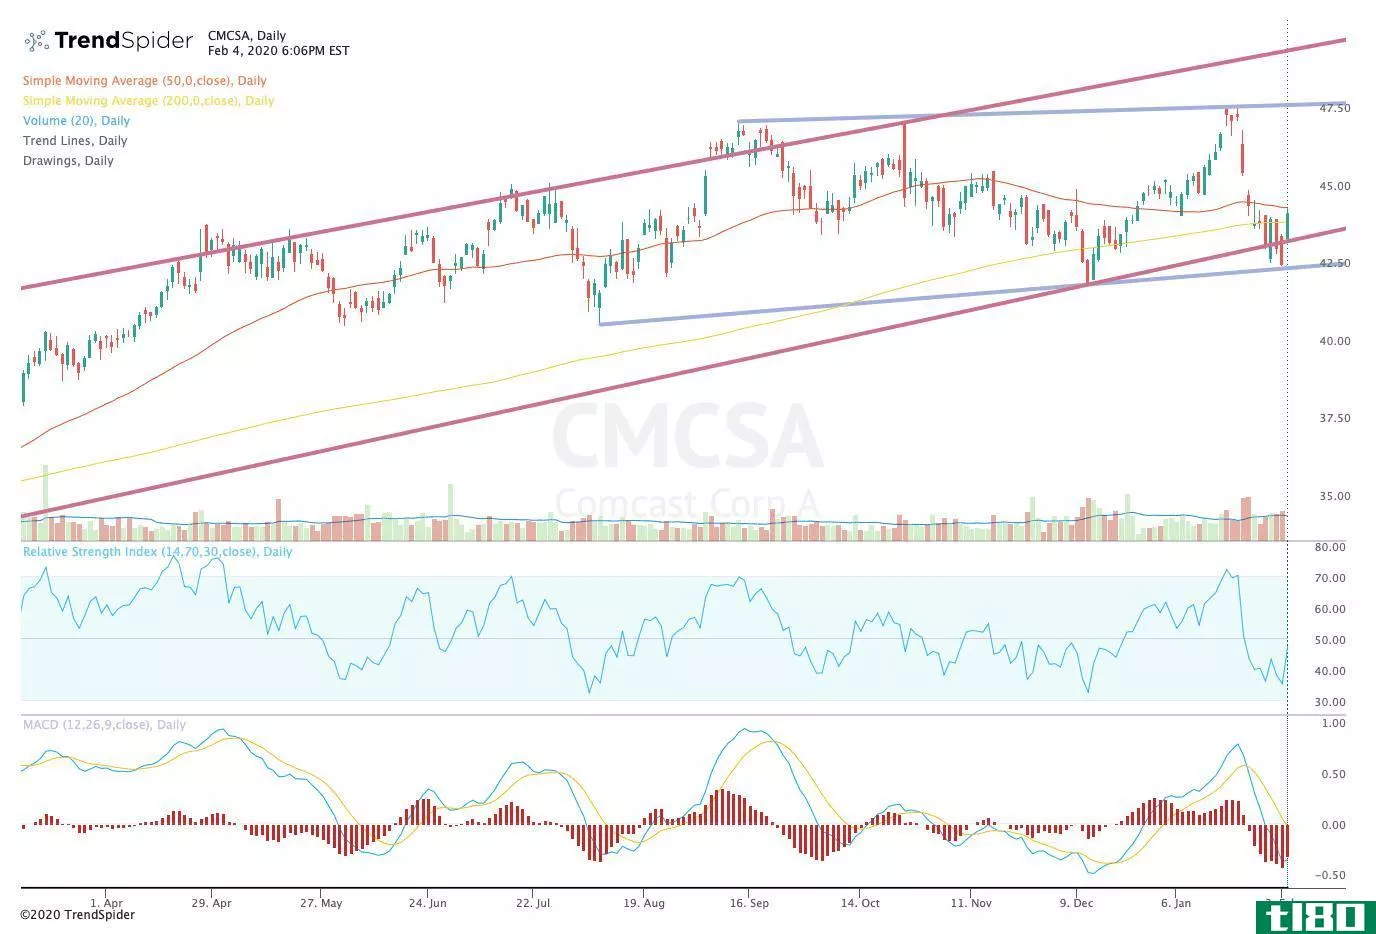 Chart showing the share price performance of Comcast Corporation (CMCSA)